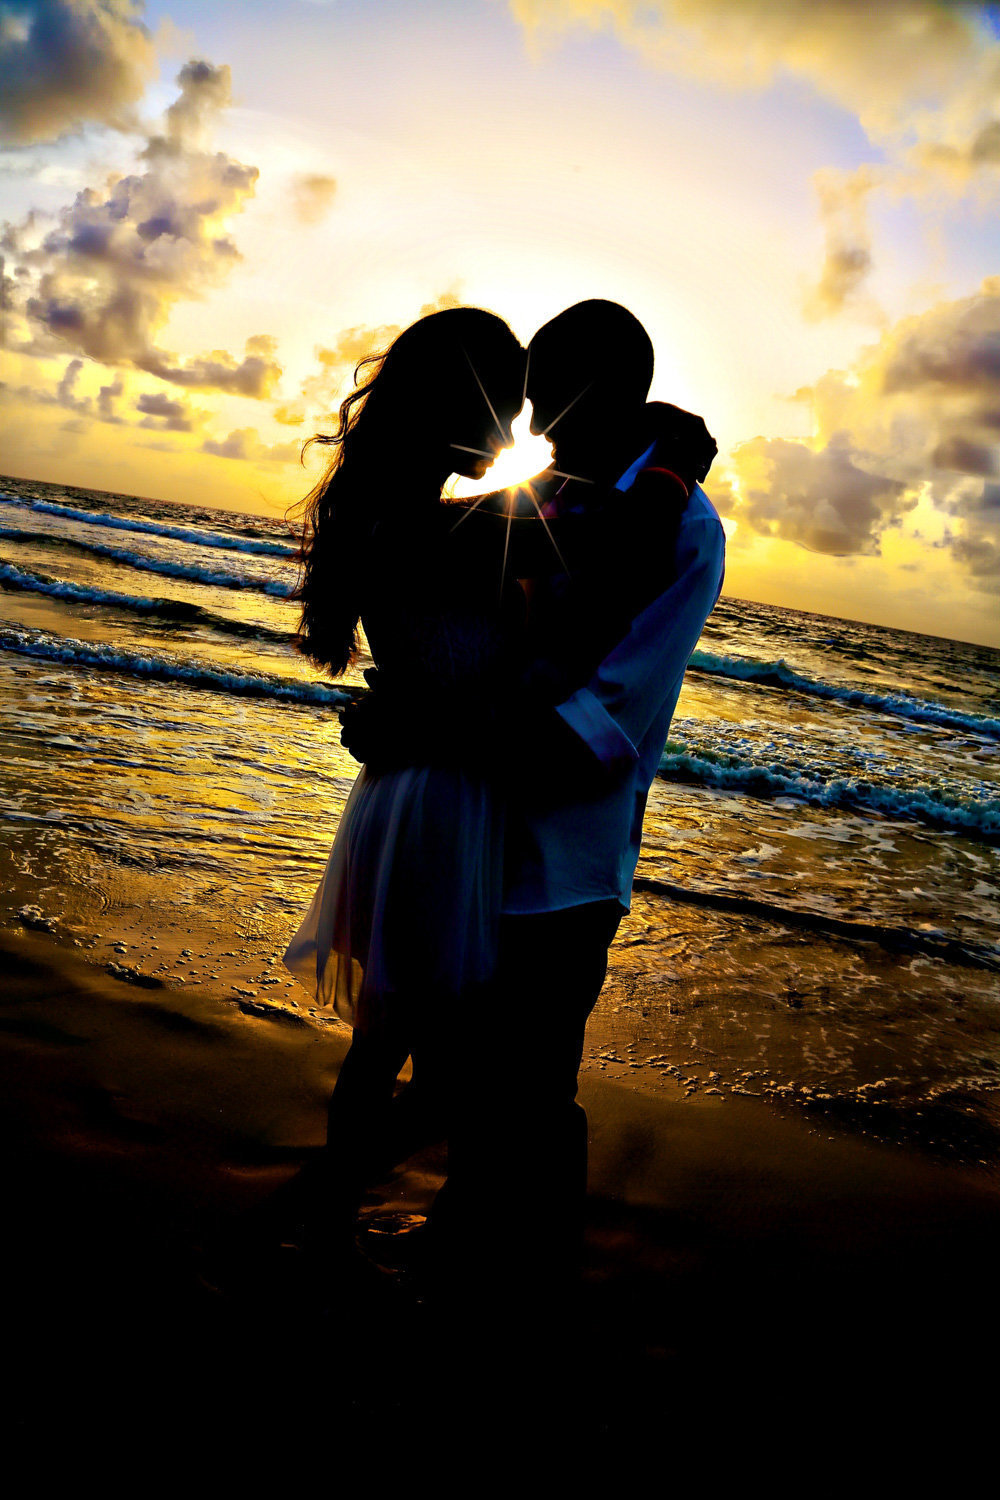 Sunset silhouette couple's picture at the beach. Photo by Ross Photography, Trinidad, W.I..